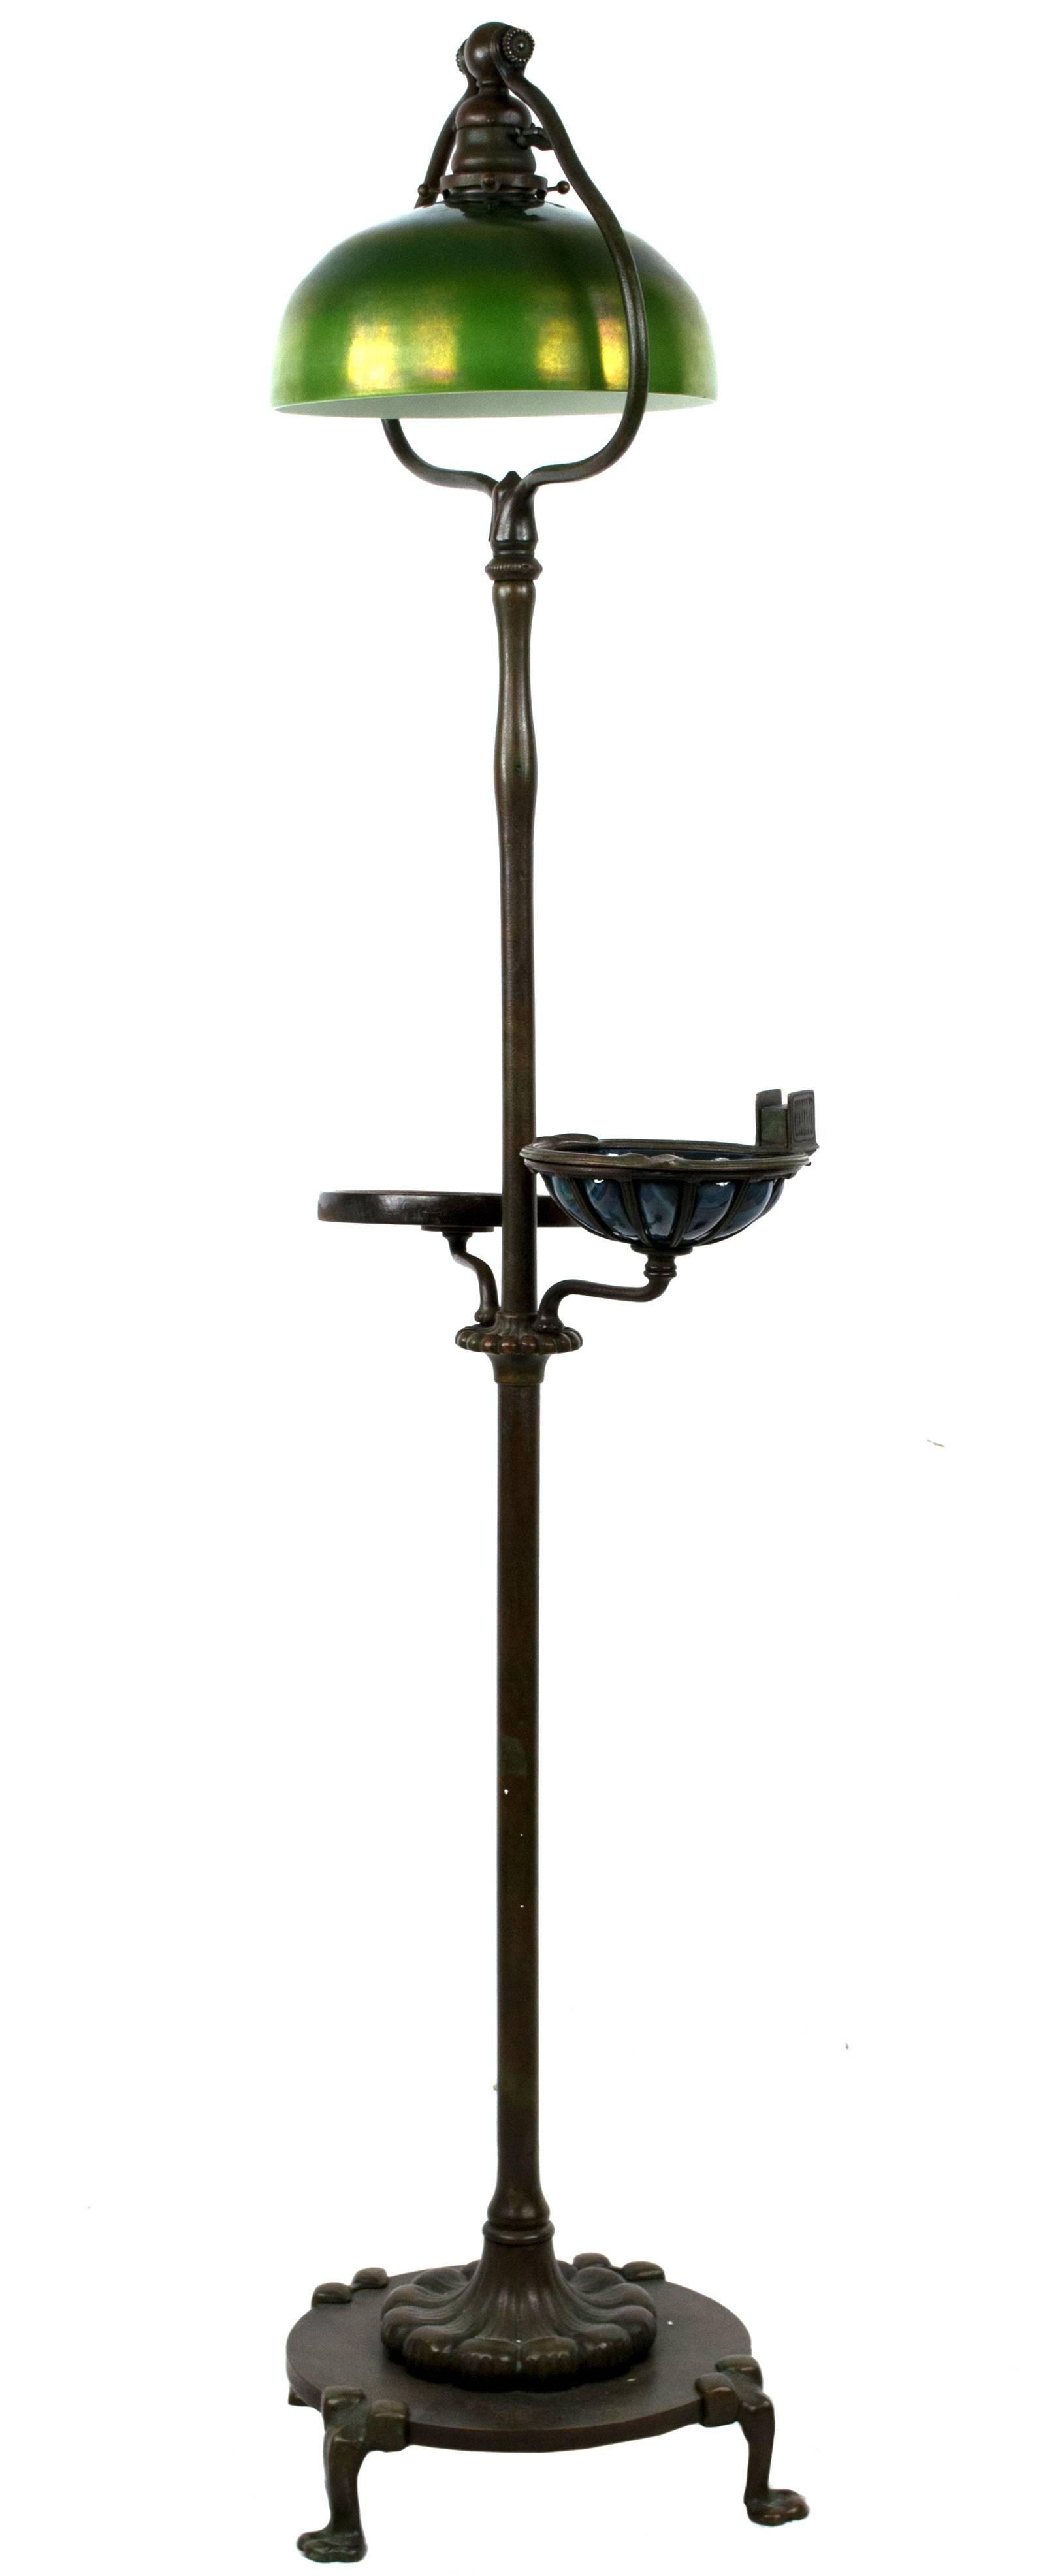 A very fine Tiffany Studios bronze floor lamp with green Favrile shade and two arms, one of bronze with a wood platform and the other made of bronze with iridescent favrile glass bowl.